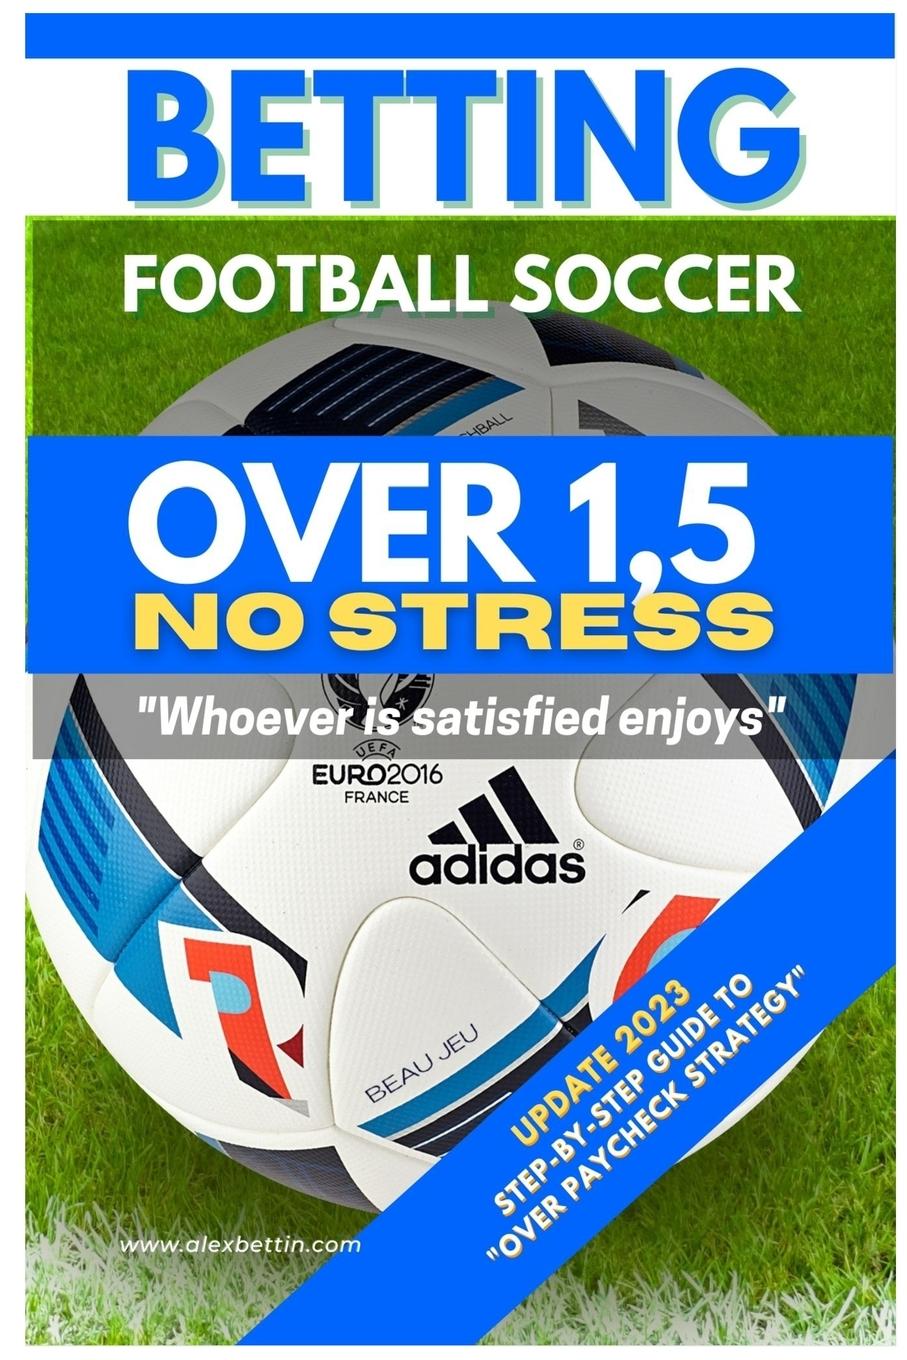 Book Betting Football Soccer OVER 1,5 NO STRESS 